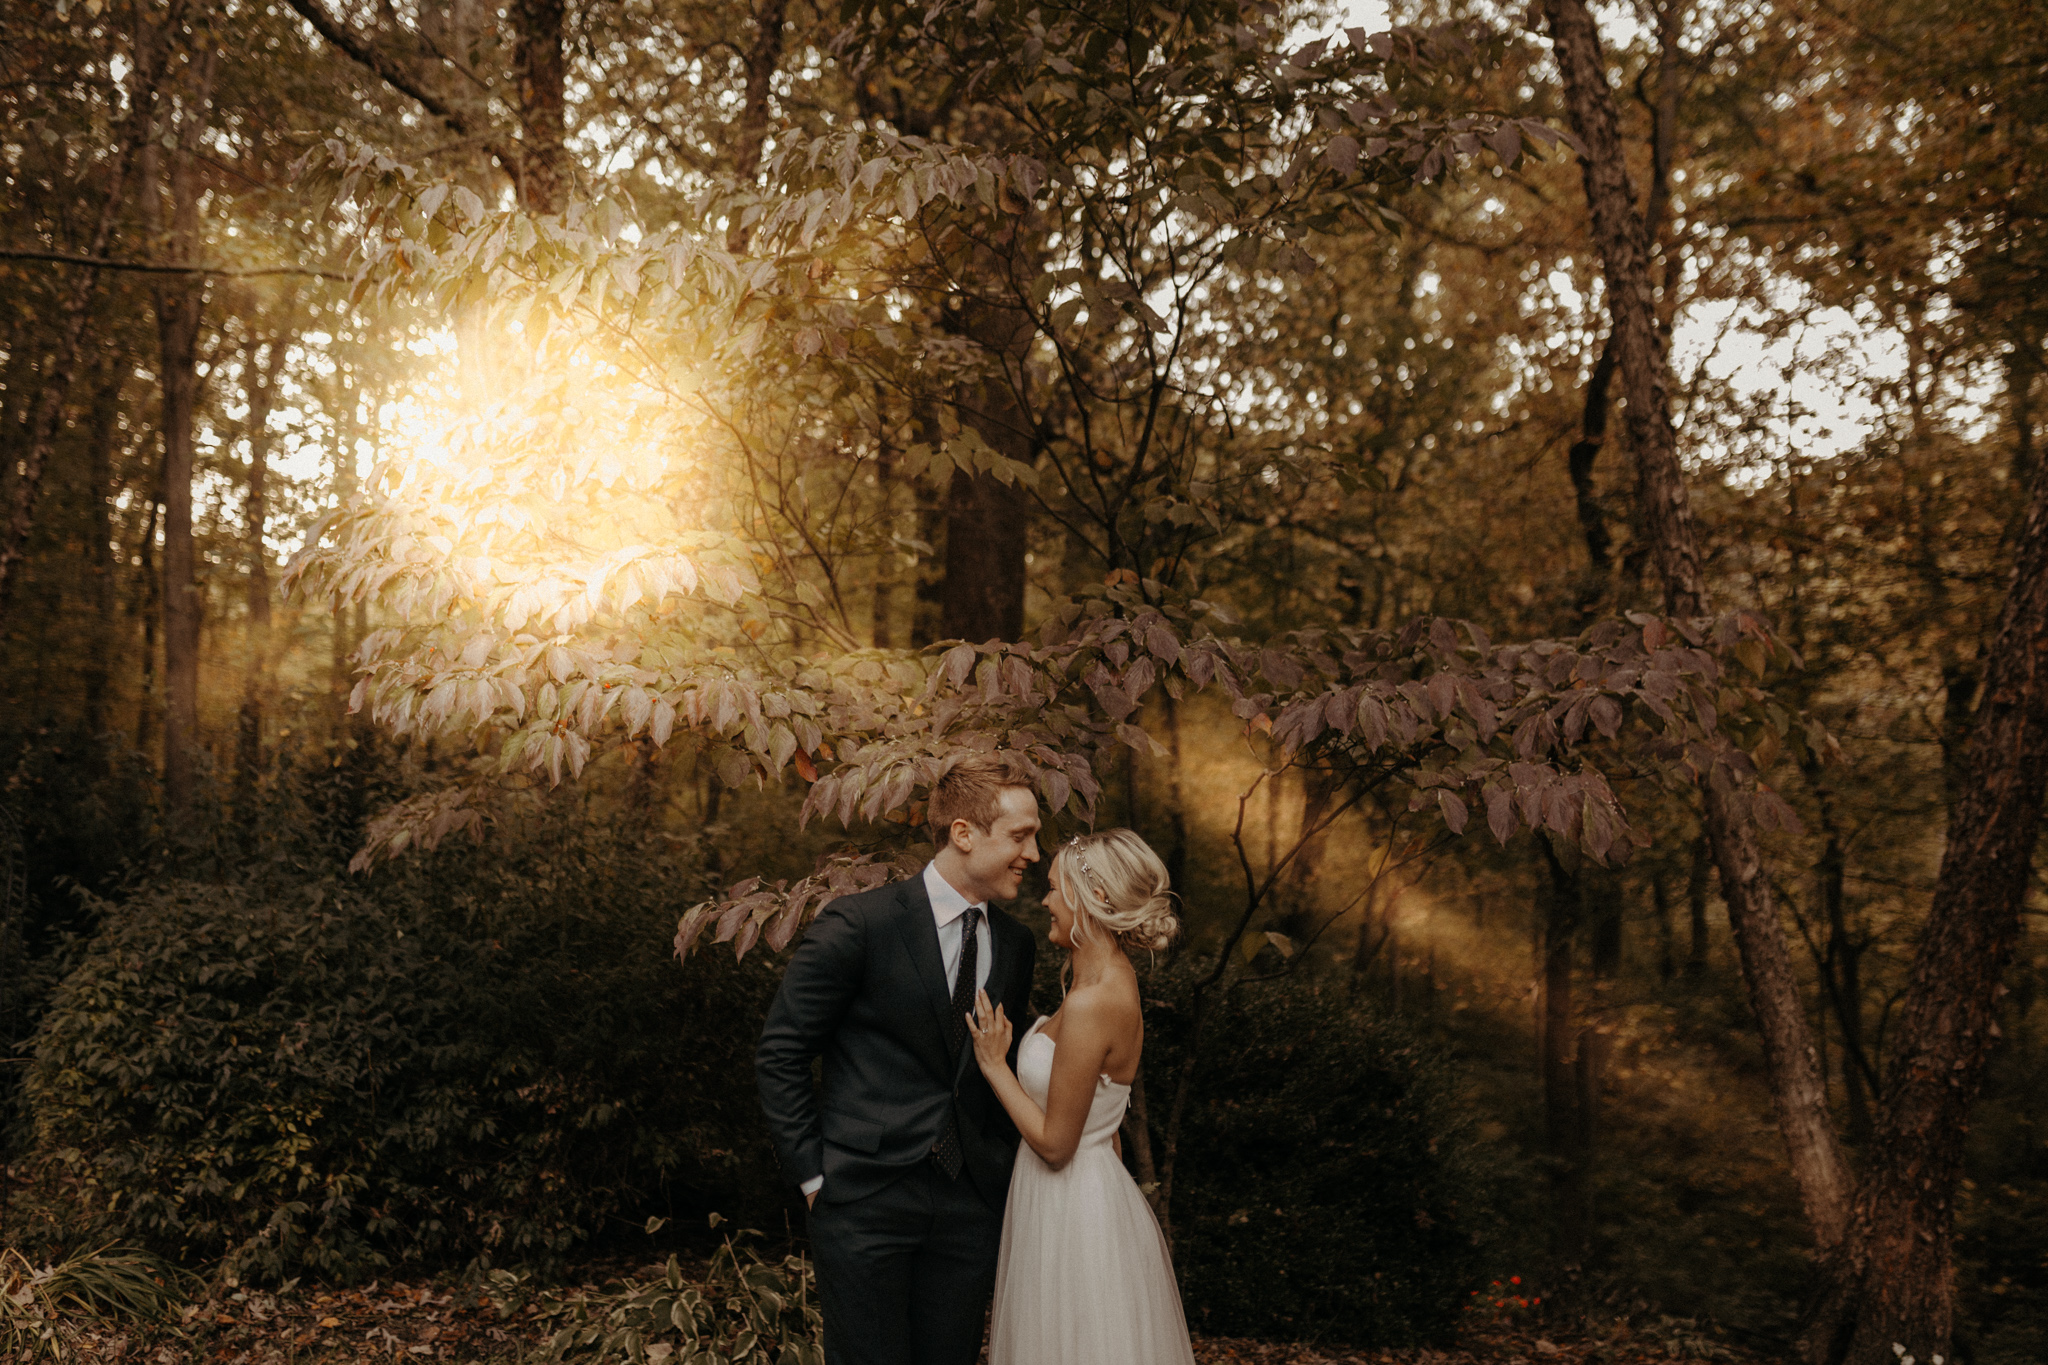 Relaxed Intimate Backyard Ceremony & Dinner Party, Maryland Wedding Photographer